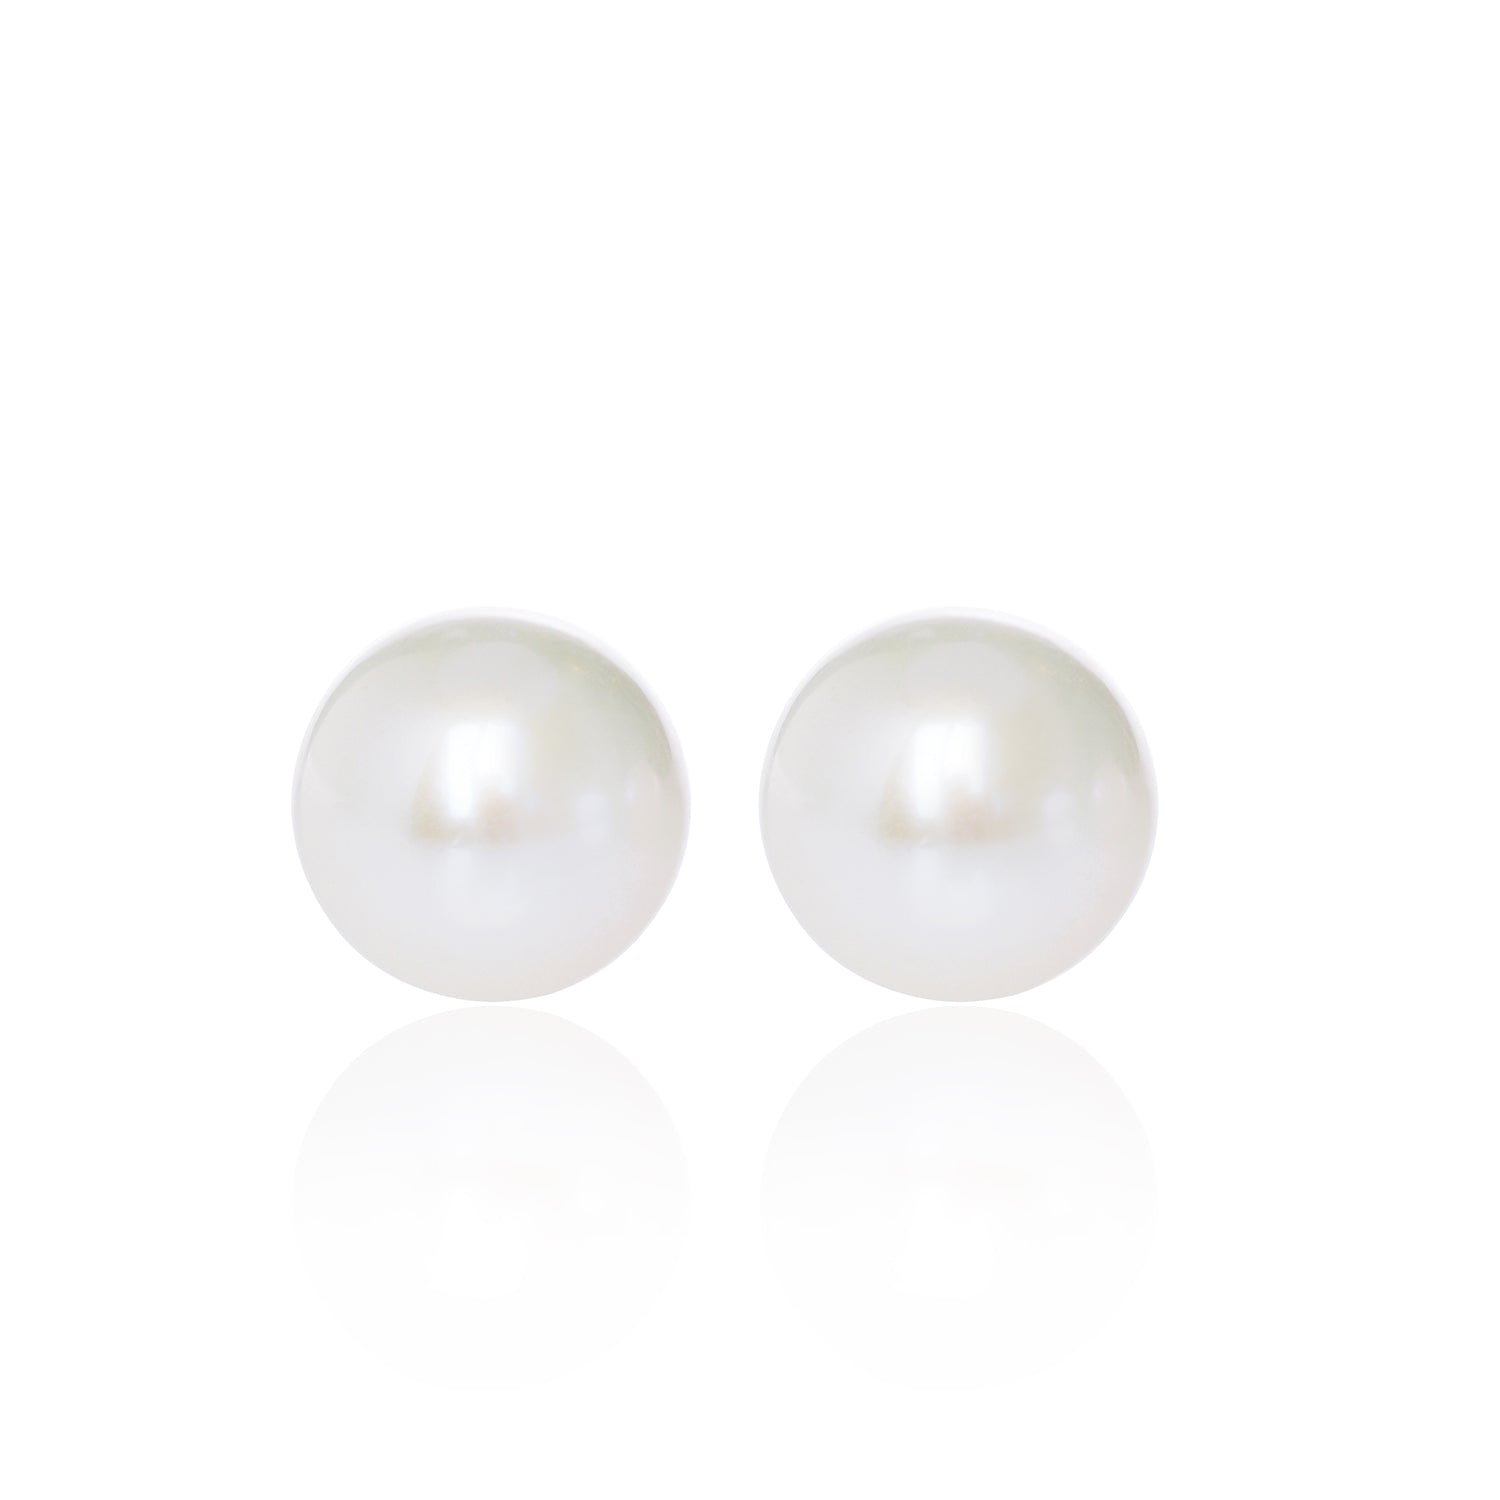 Front view of our Big Pearl Studs handmade in Switzerland in 18ct yellow gold by McFarlane Fine Jewellery